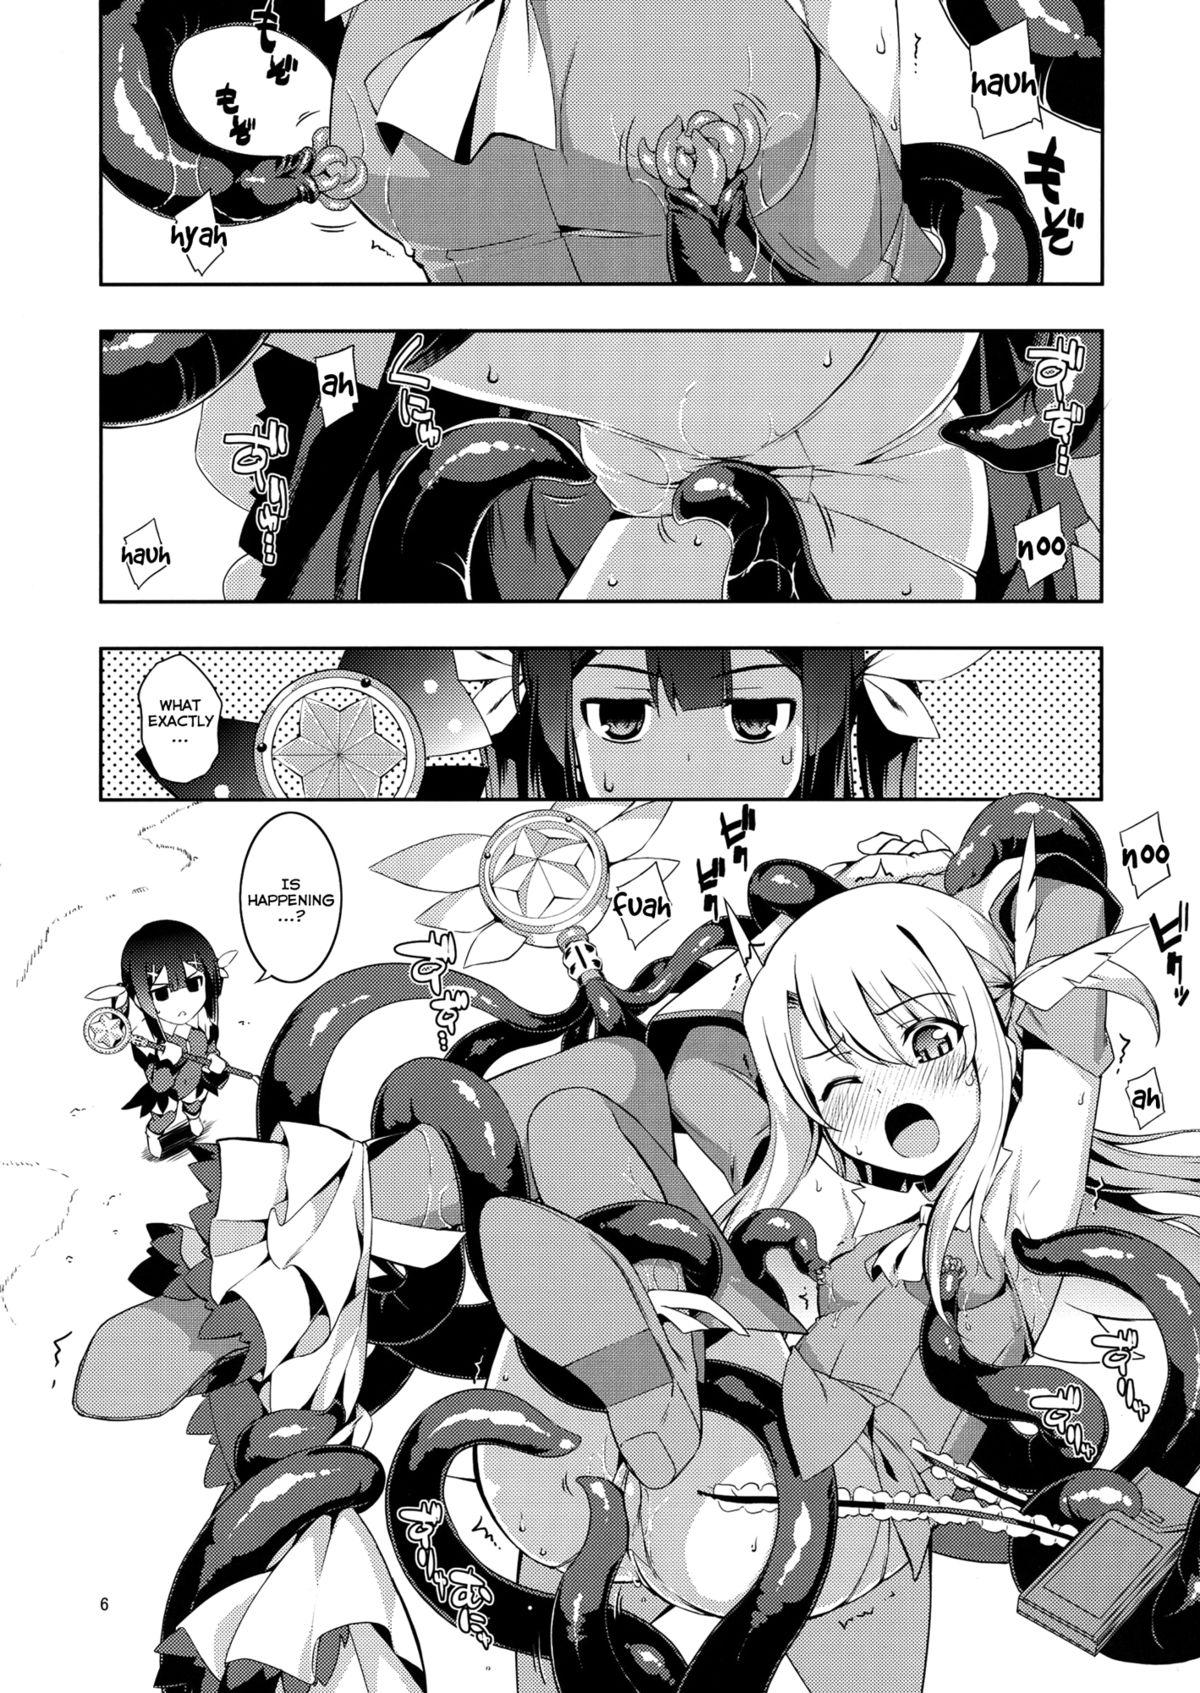 Femdom RE 18 - Fate kaleid liner prisma illya Whipping - Page 6